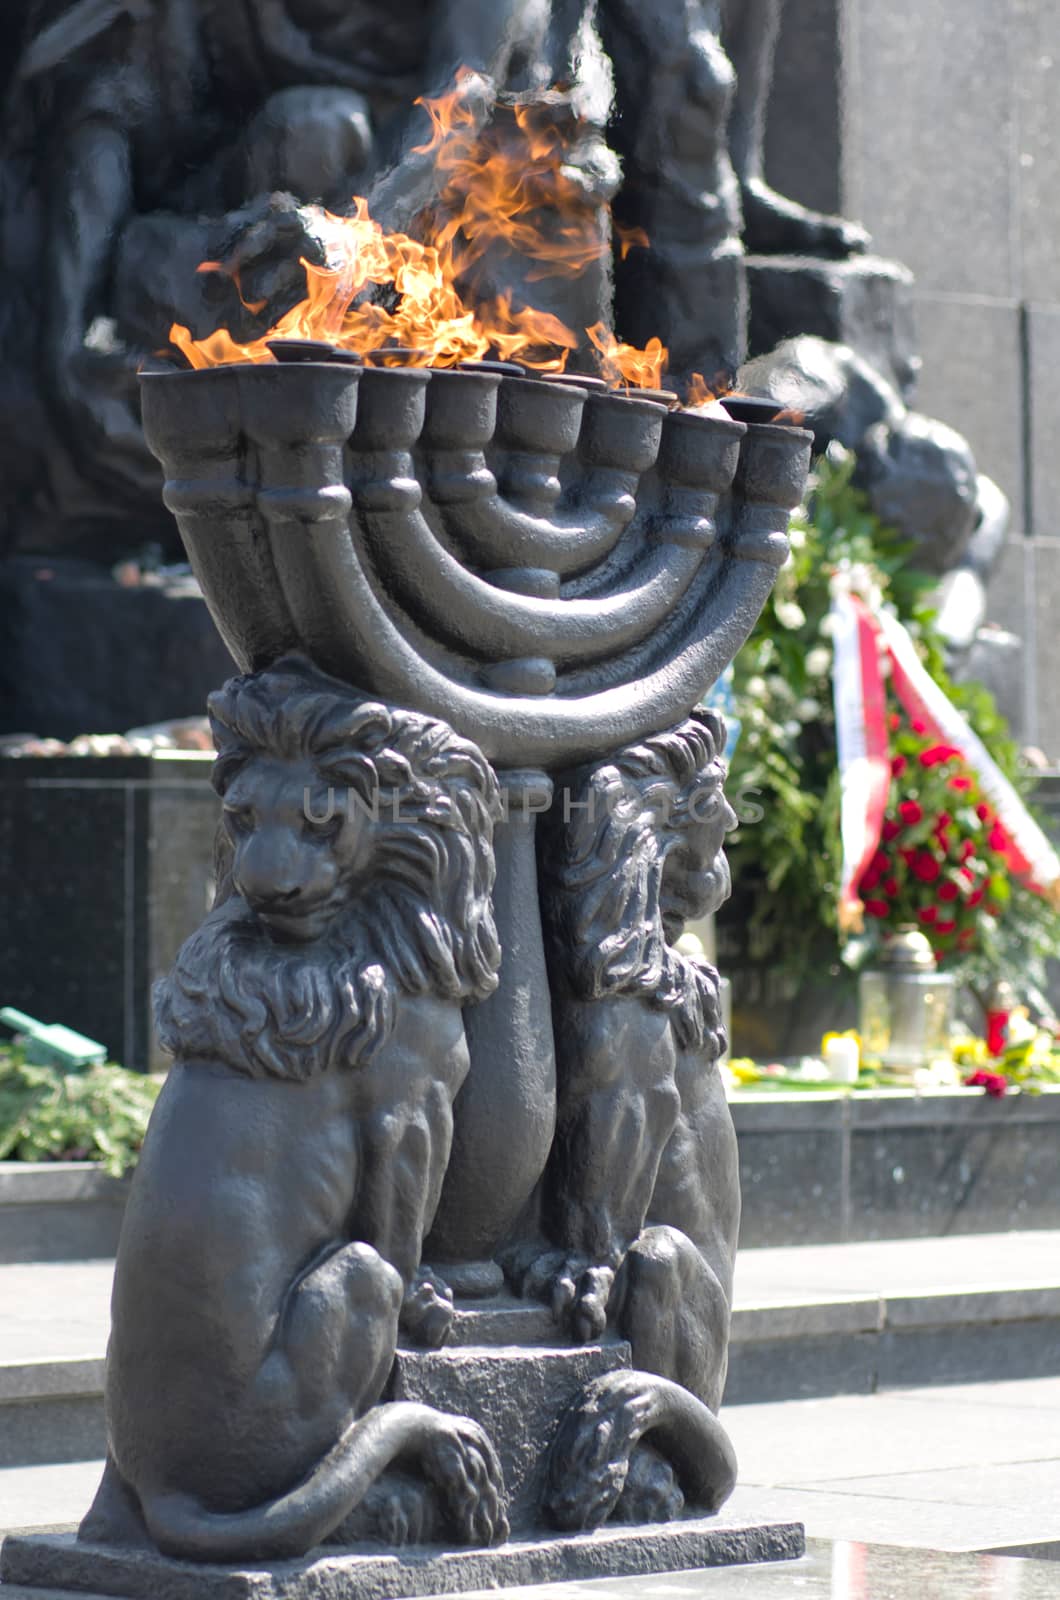 Warsaw, Poland – April 19, 2014: Celebration of the 71 anniversary of the Warsaw Ghetto Uprising. Menorah with burning flame.